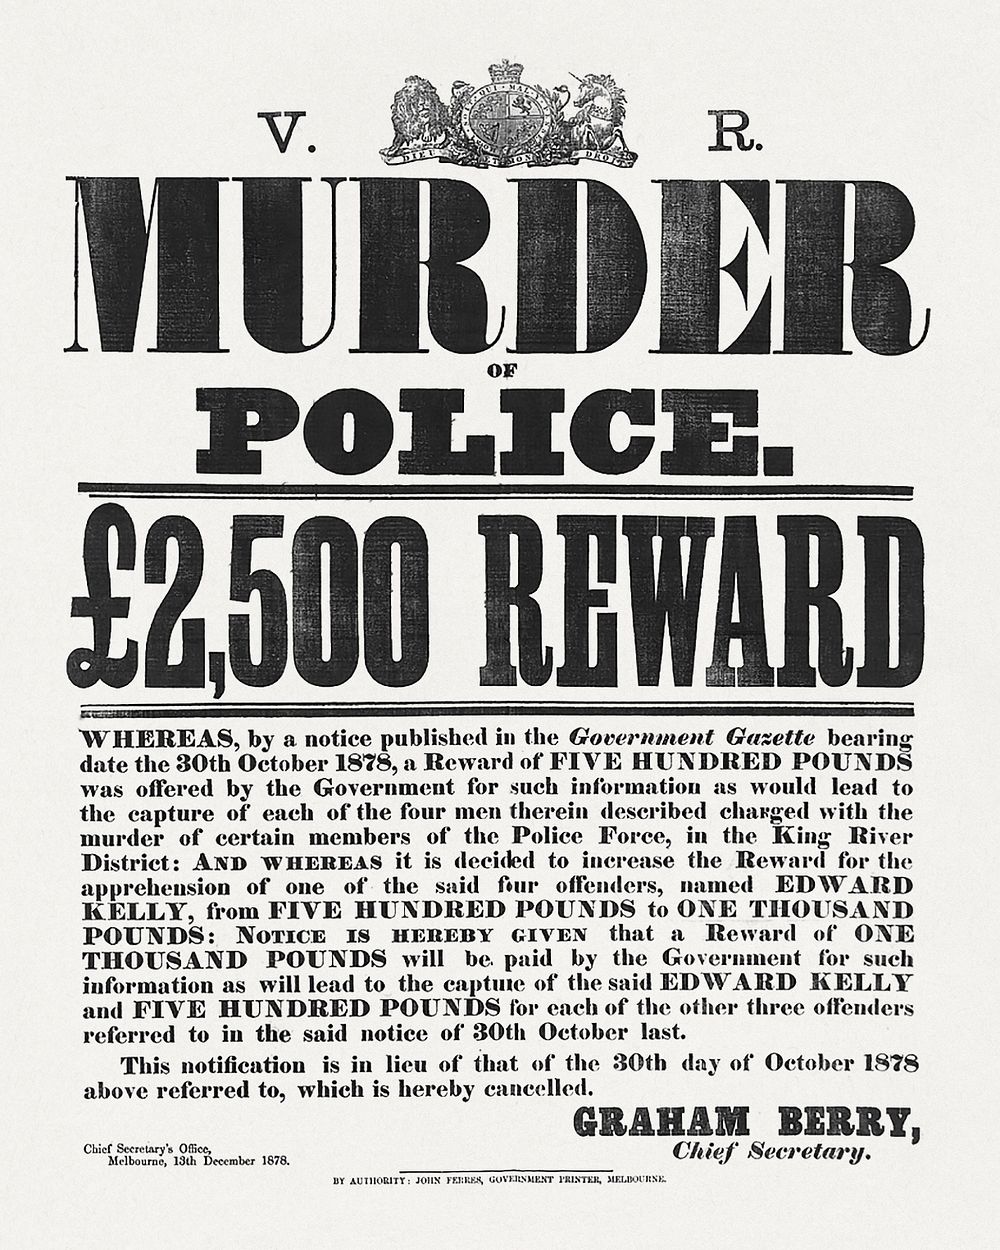 Wanted Poster for up to £2,500 reward for the information leading to the capture of Ned (Edward) Kelly or one of four…